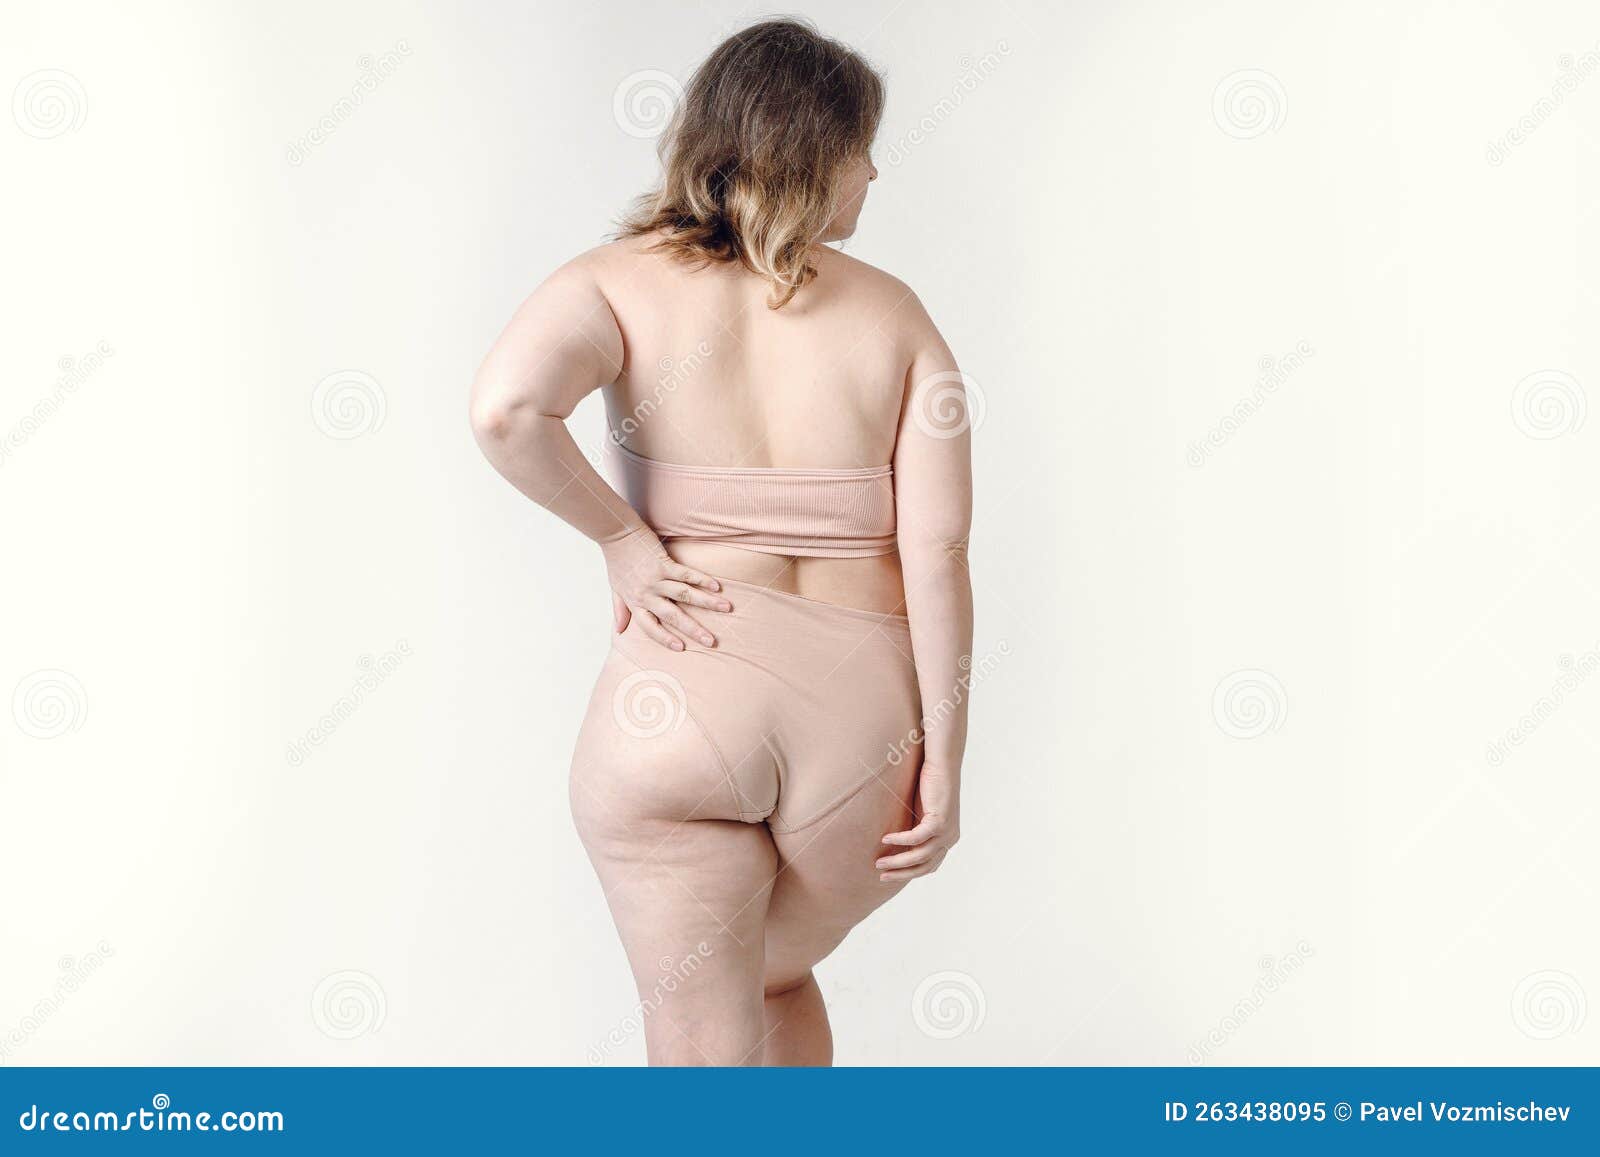 https://thumbs.dreamstime.com/z/overweight-plus-size-woman-stretch-marks-her-skin-standing-white-underwear-women-s-thick-thighs-women-s-thick-263438095.jpg